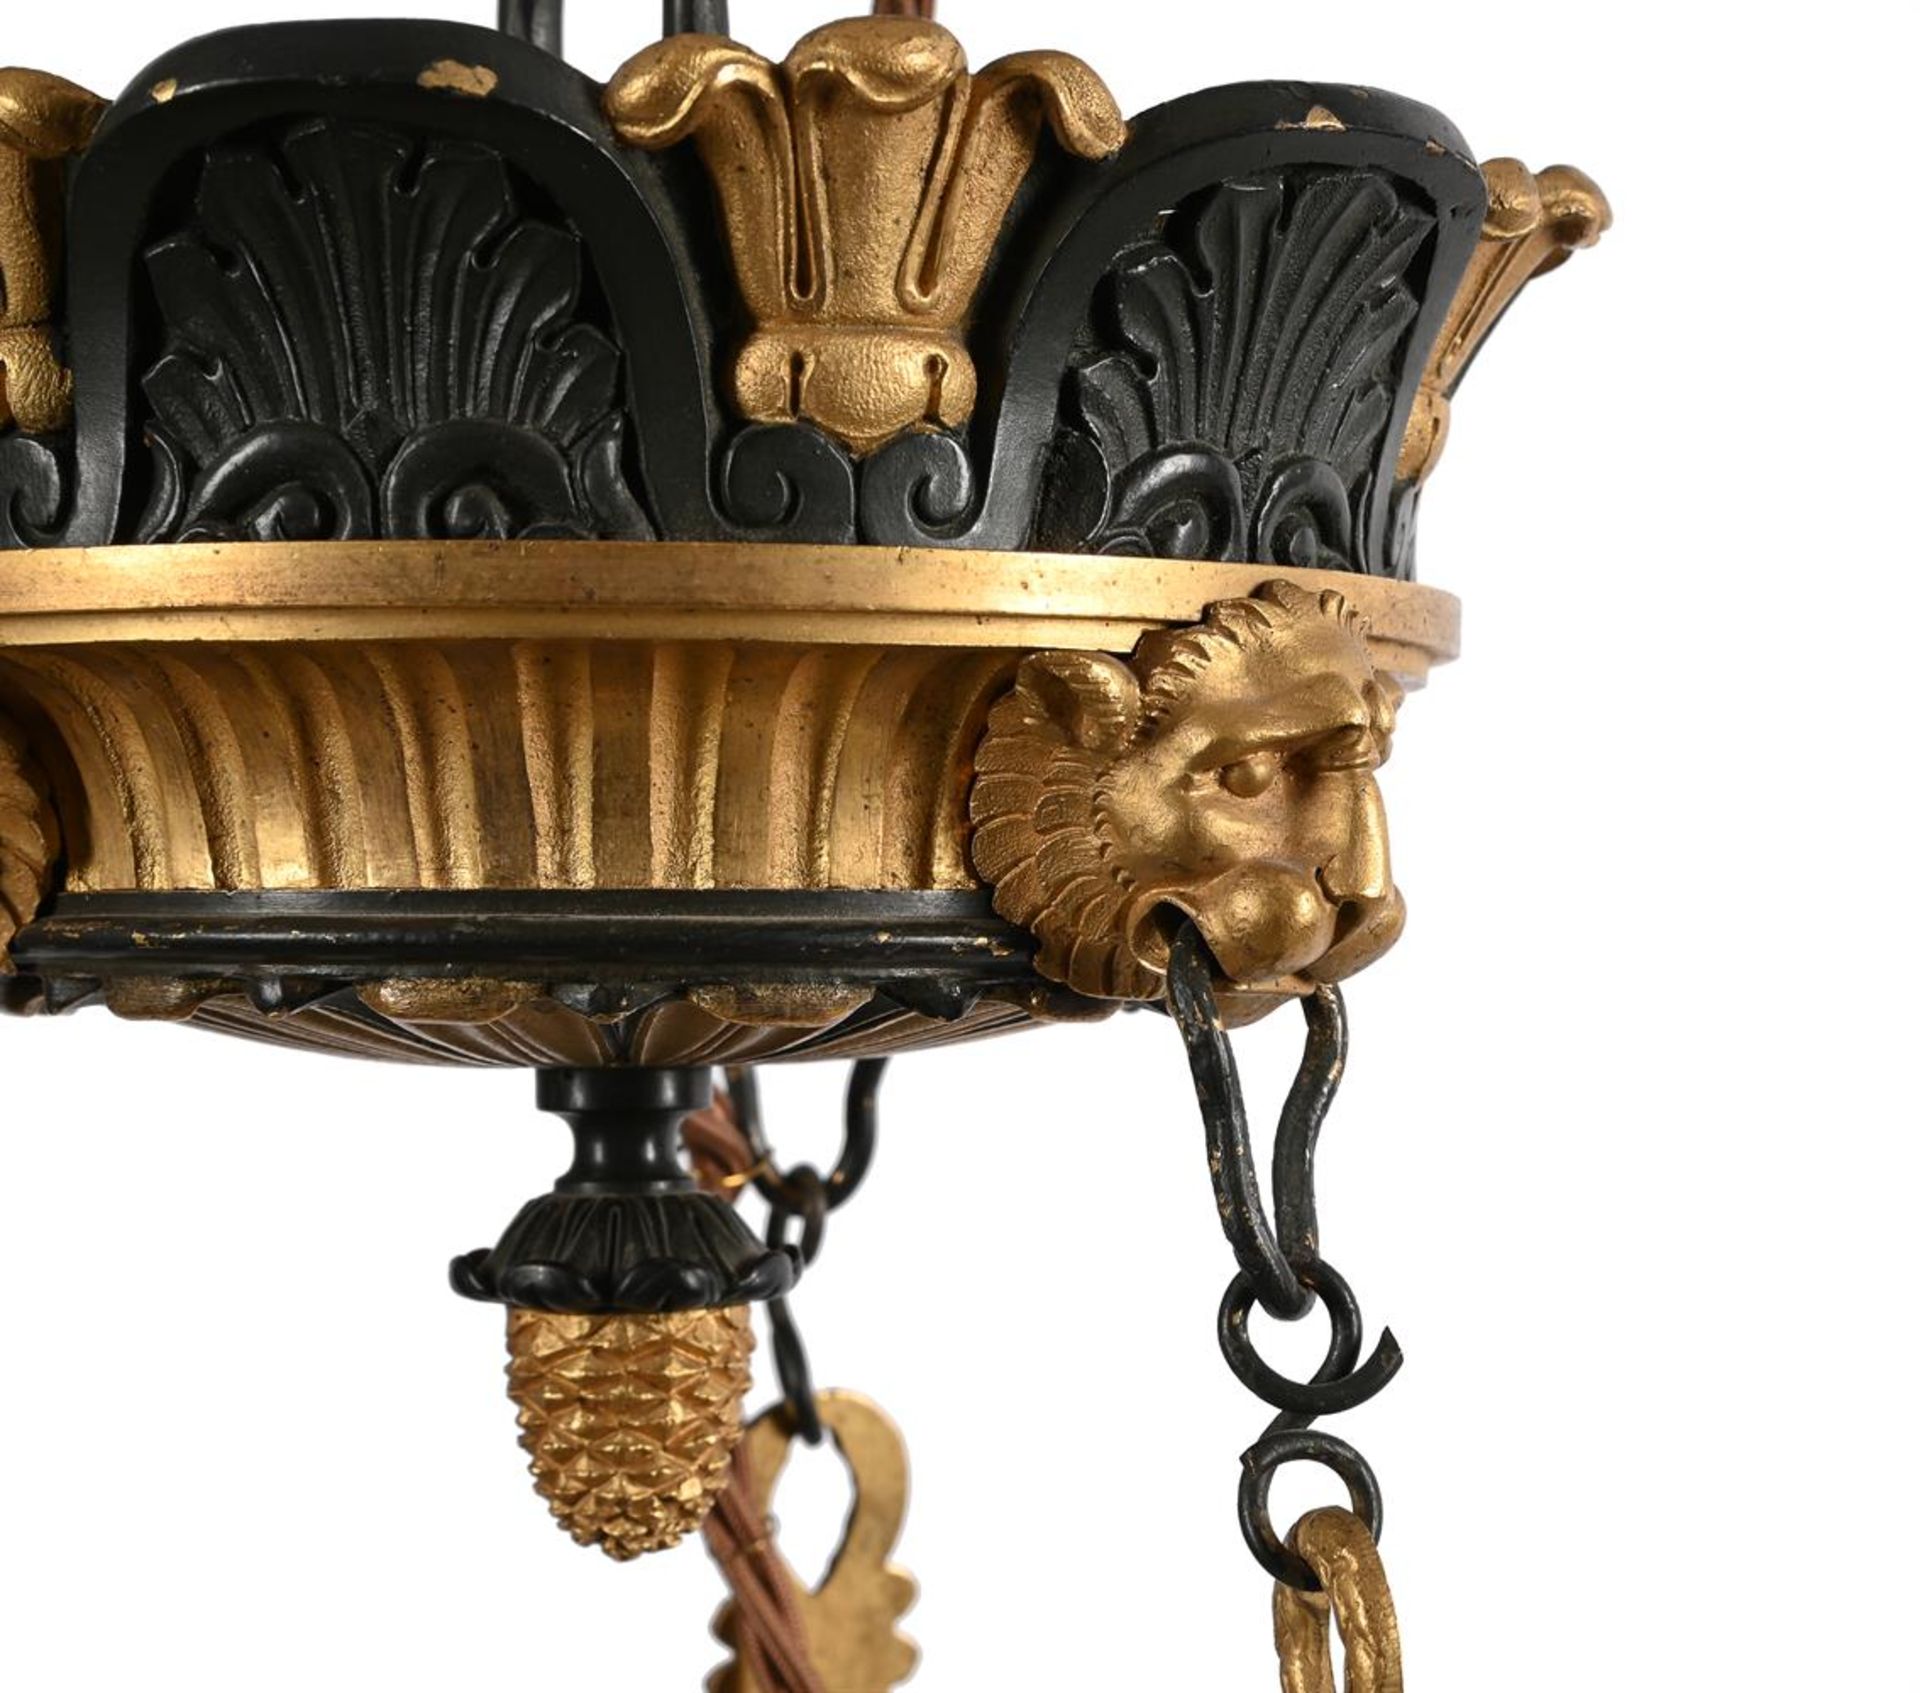 A FRENCH PATINATED AND GILT BRONZE THREE LIGHT CHANDELIER, 19TH OR EARLY 20TH CENTURY - Image 3 of 3